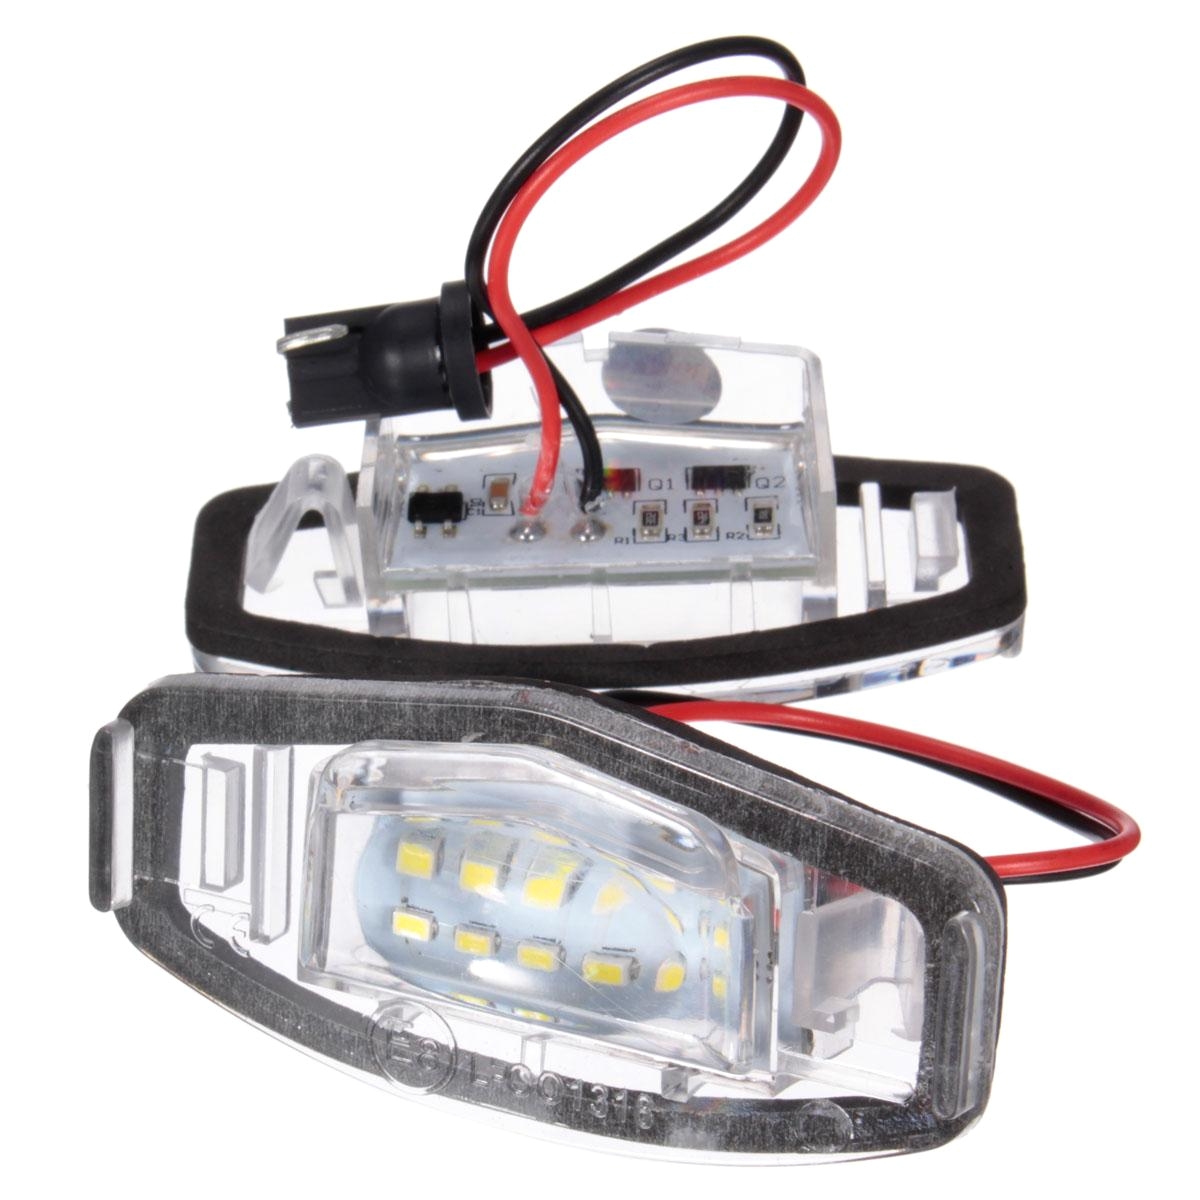 2018 18 led number license plate light for car truck trailer tractor from sara1688 21 1 dhgate com